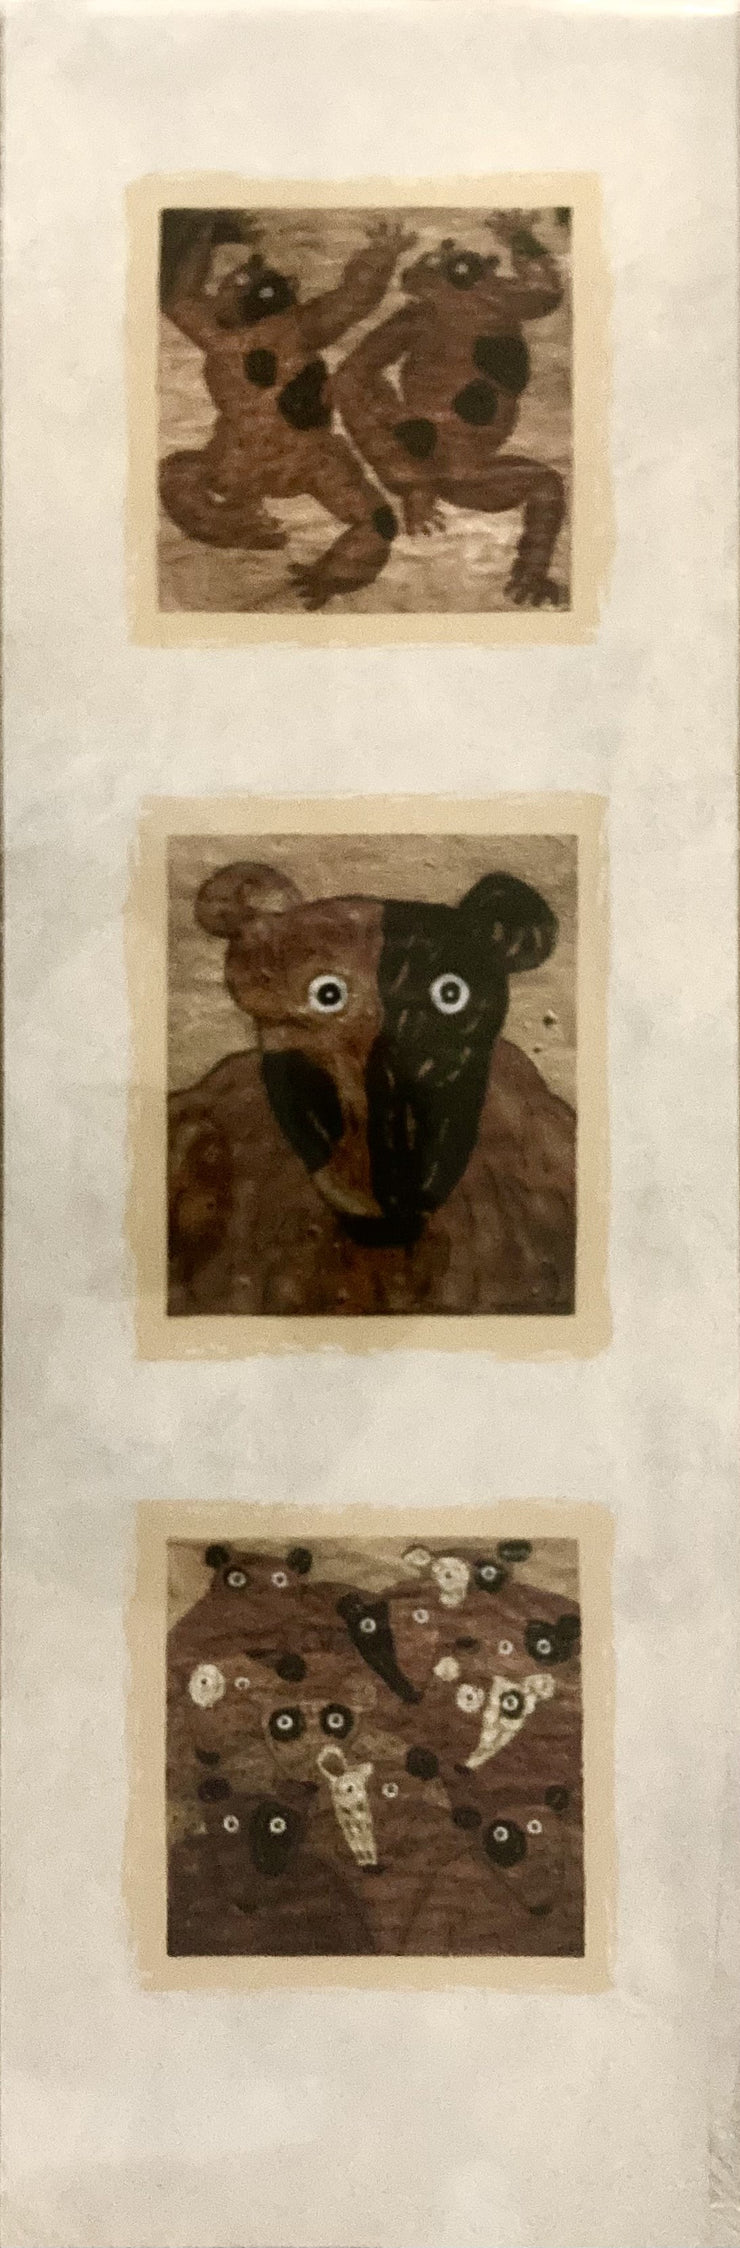 Appianet, Herve-Maury - Collage of Bears